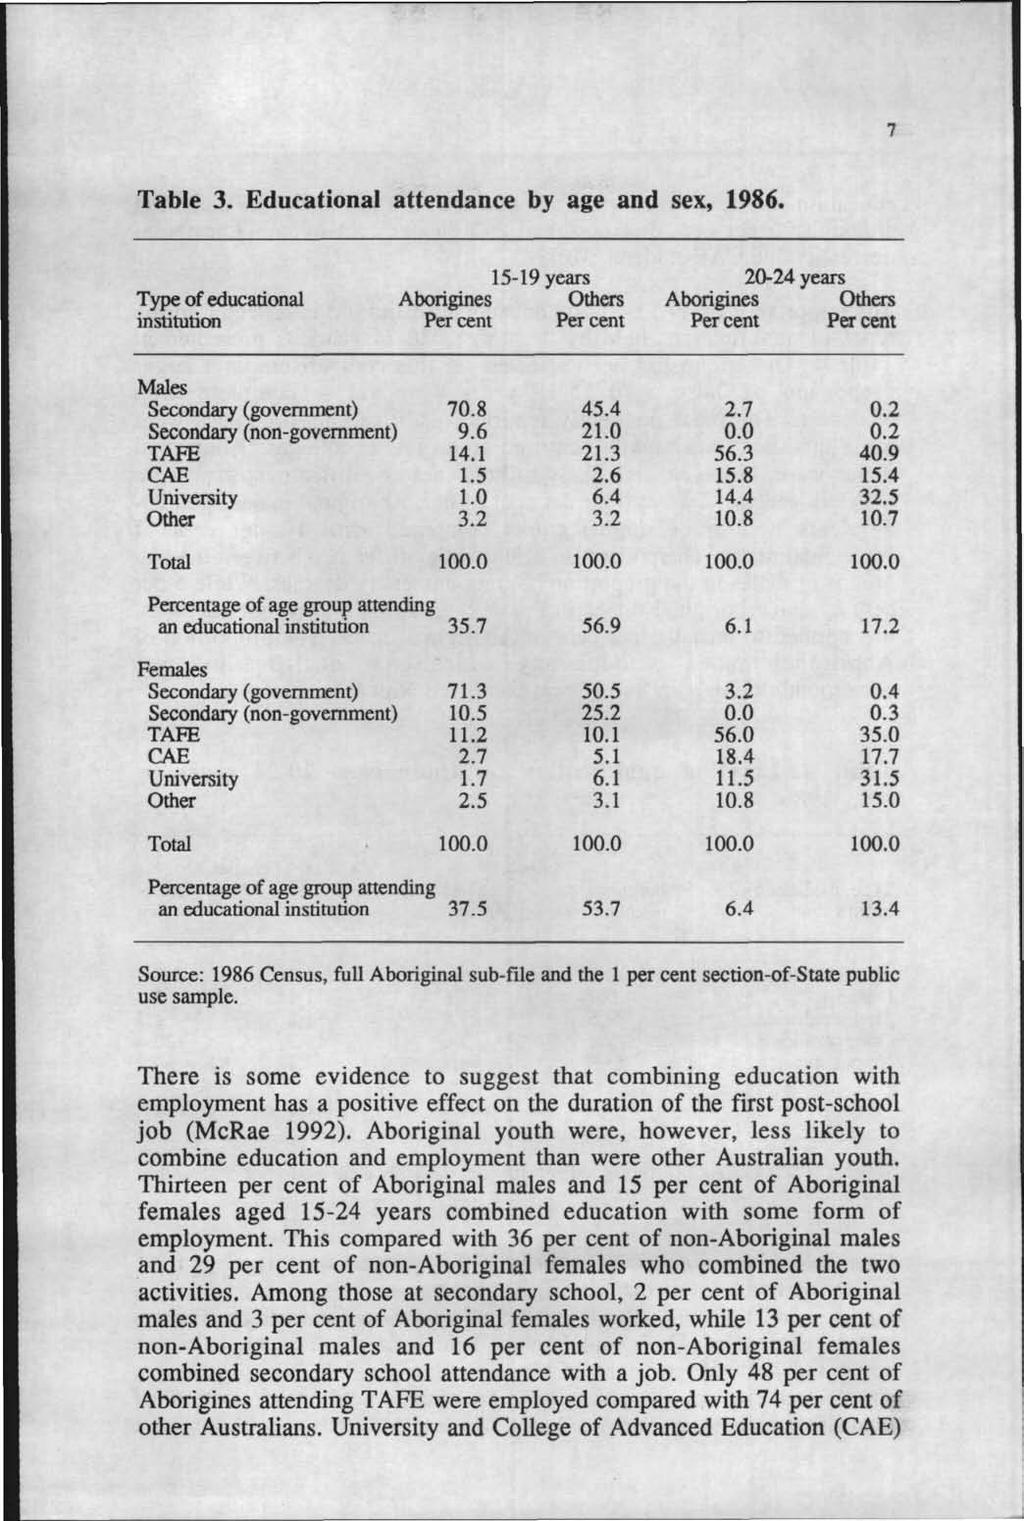 Table 3. Educational attendance by age and sex, 1986.